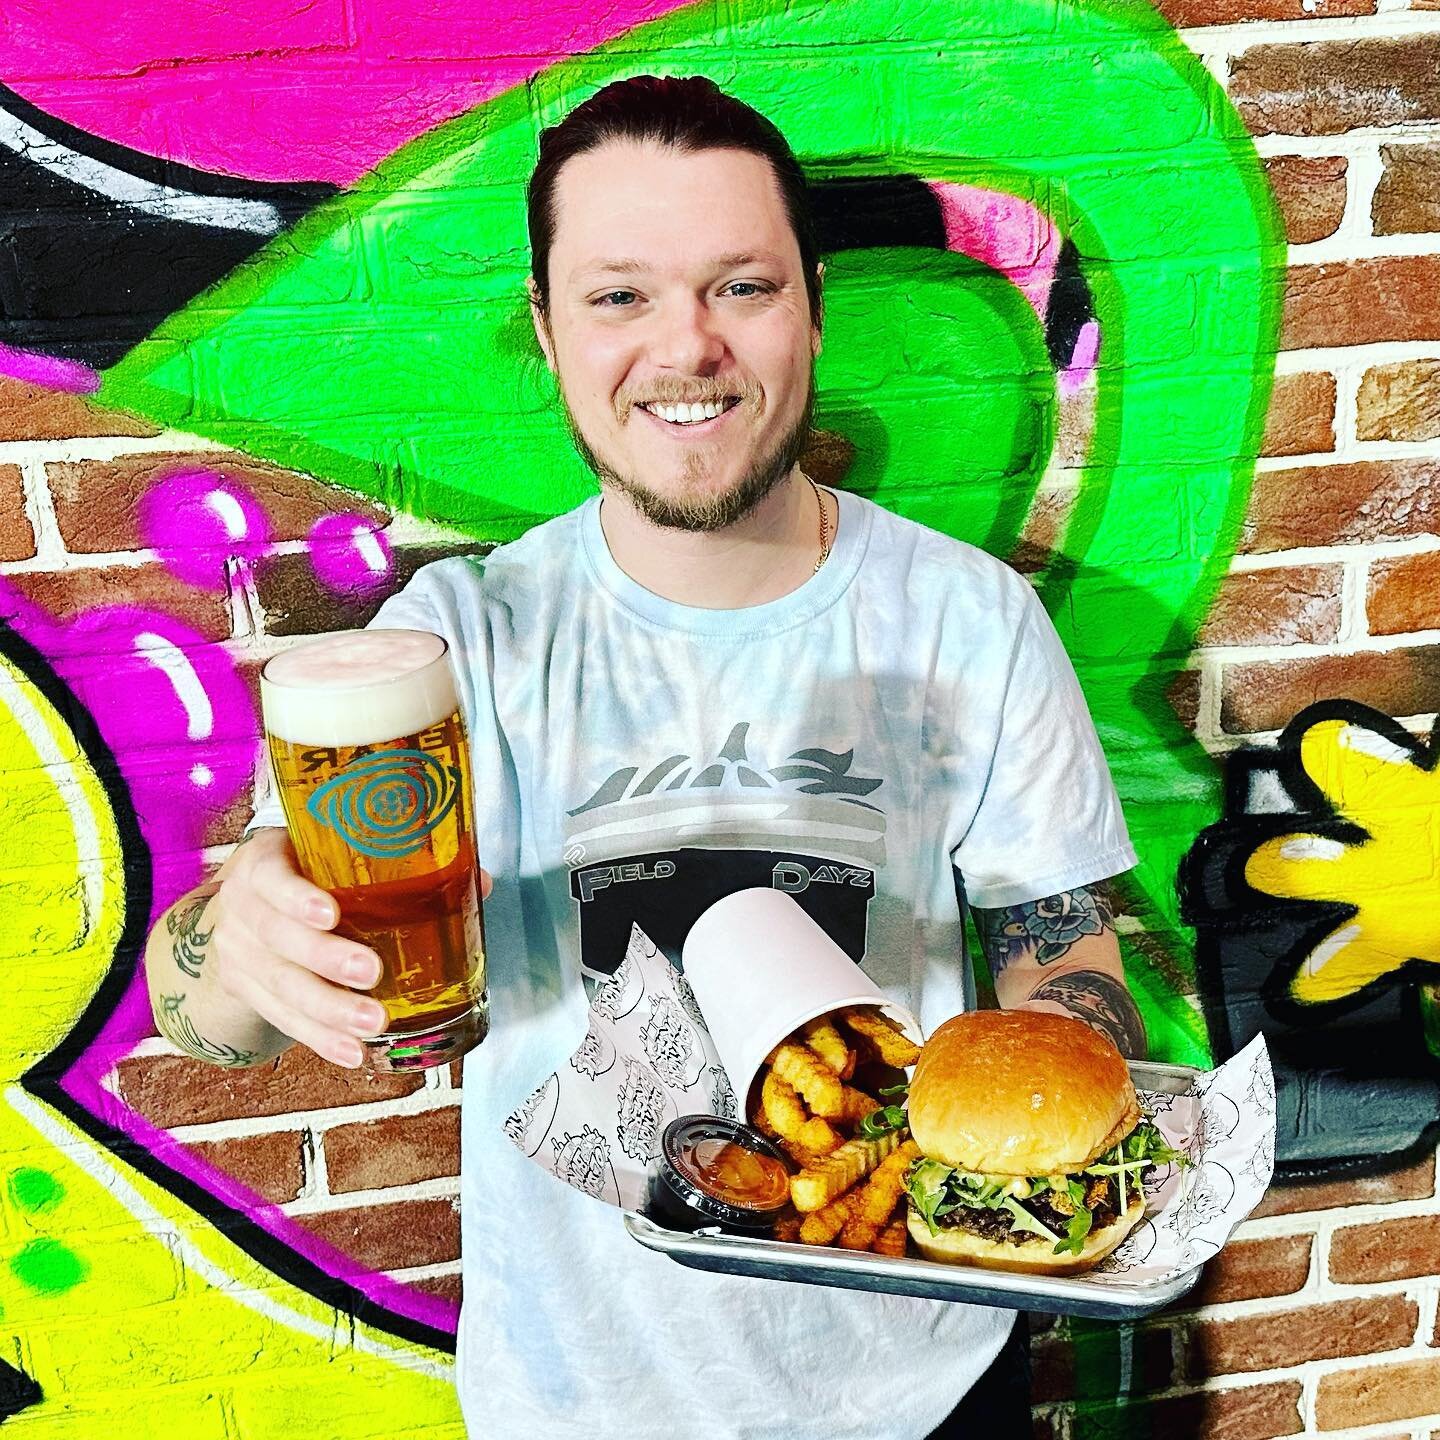 It&rsquo;s Smash Burger Monday and our Head Brewer Adrian has the perfect pairing!

The My Thai Burger paired with Cloud Storm New Zealand Pale Ale.

$15 gets your a burger of your choice, fries, and a 16oz. draught. We&rsquo;ve also got Music Bingo 